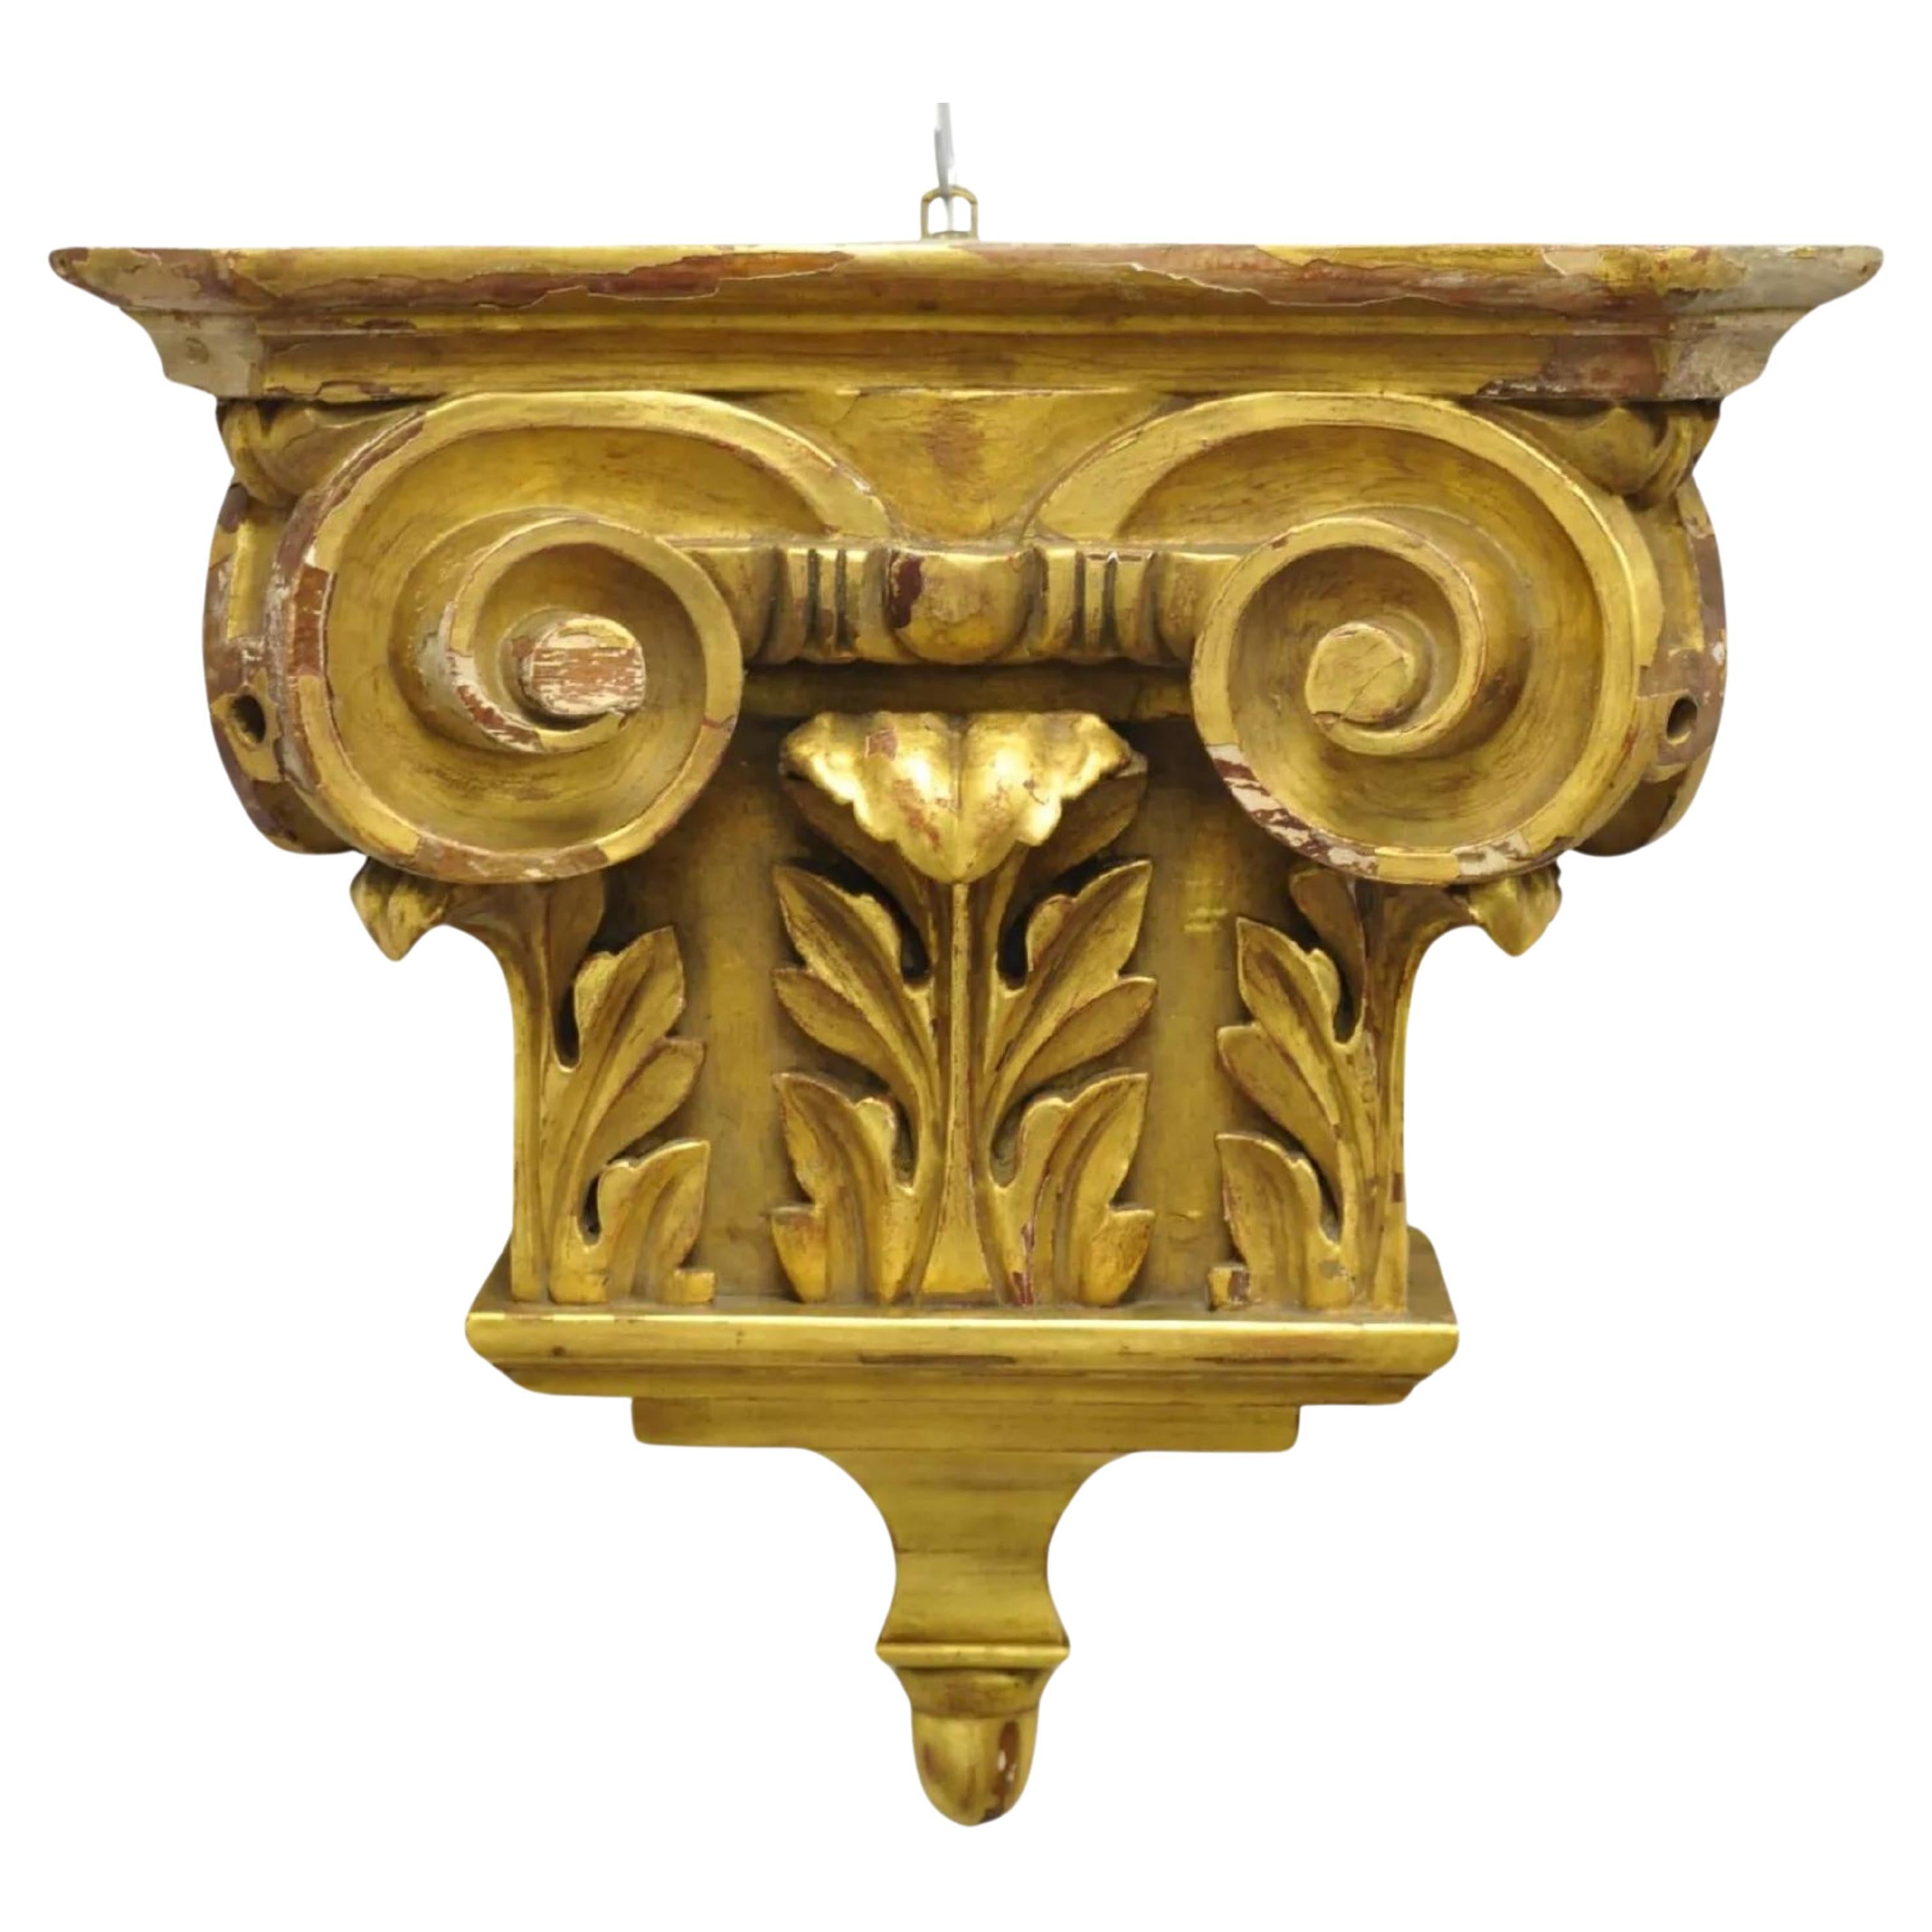 Antique Gold Giltwood French Louis XV Style Wooden Acanthus Corbel Wall Bracket For Sale